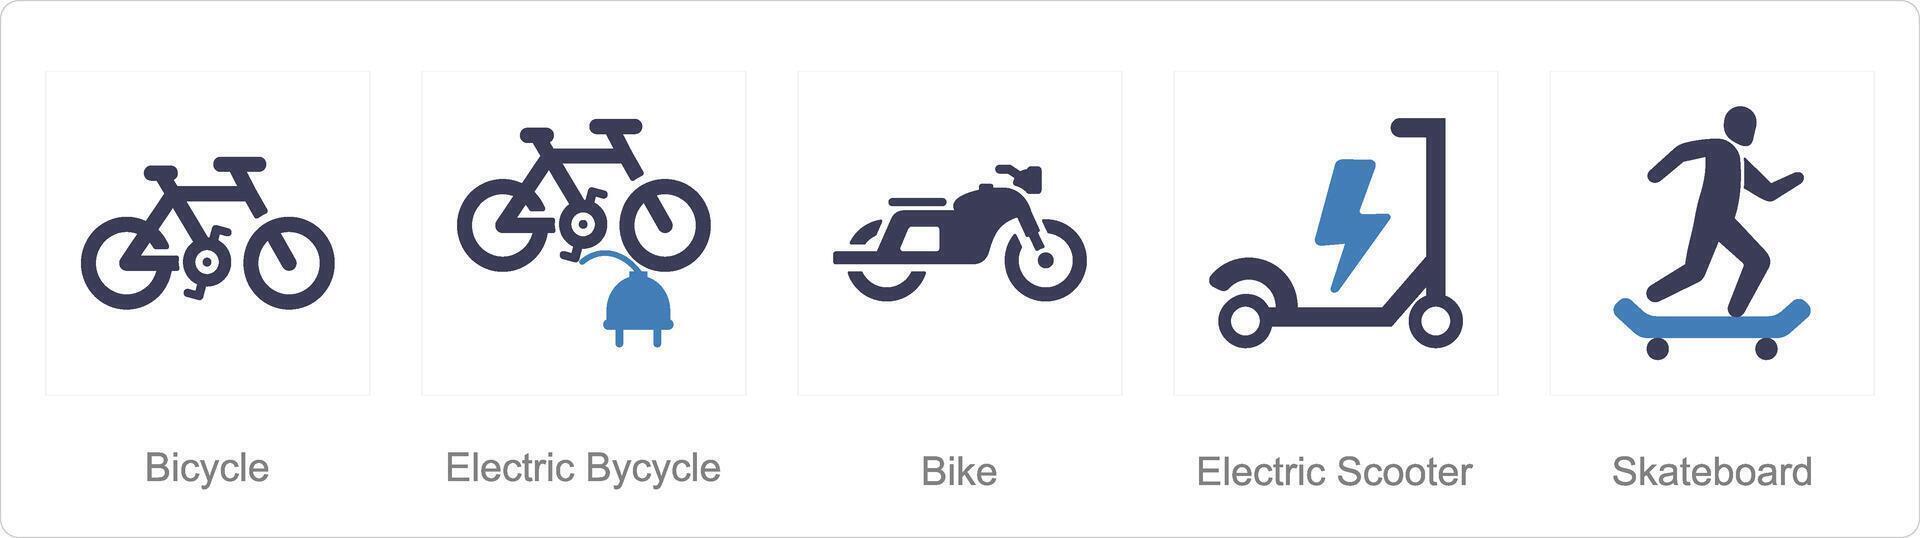 A set of 5 Mix icons as bicycle, electric bicycle, bik vector